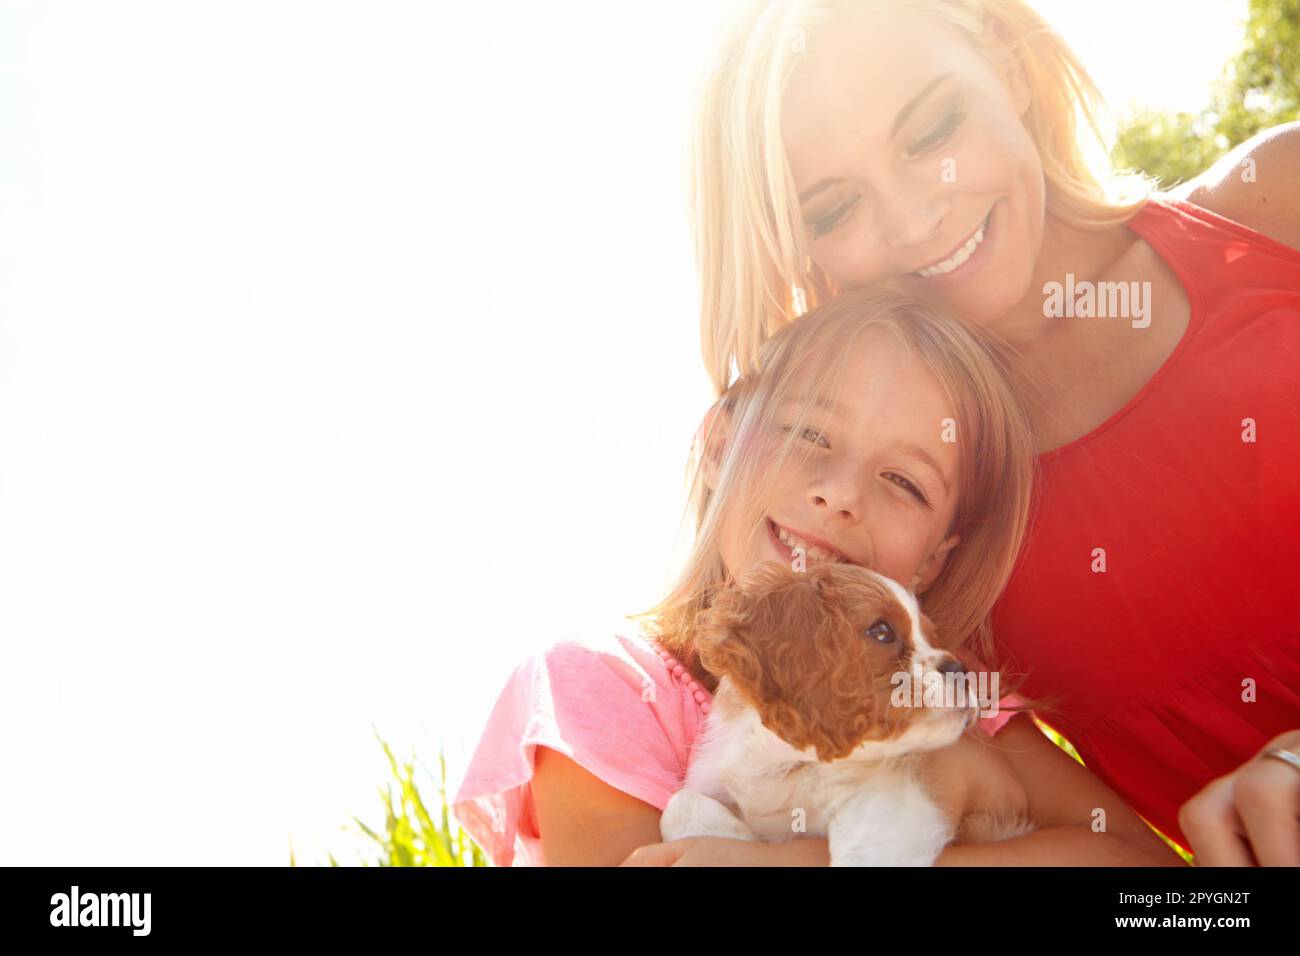 Animal companionship makes a happier home. Portrait of a mother, daughter and puppy at bliss in the outdoors. Stock Photo